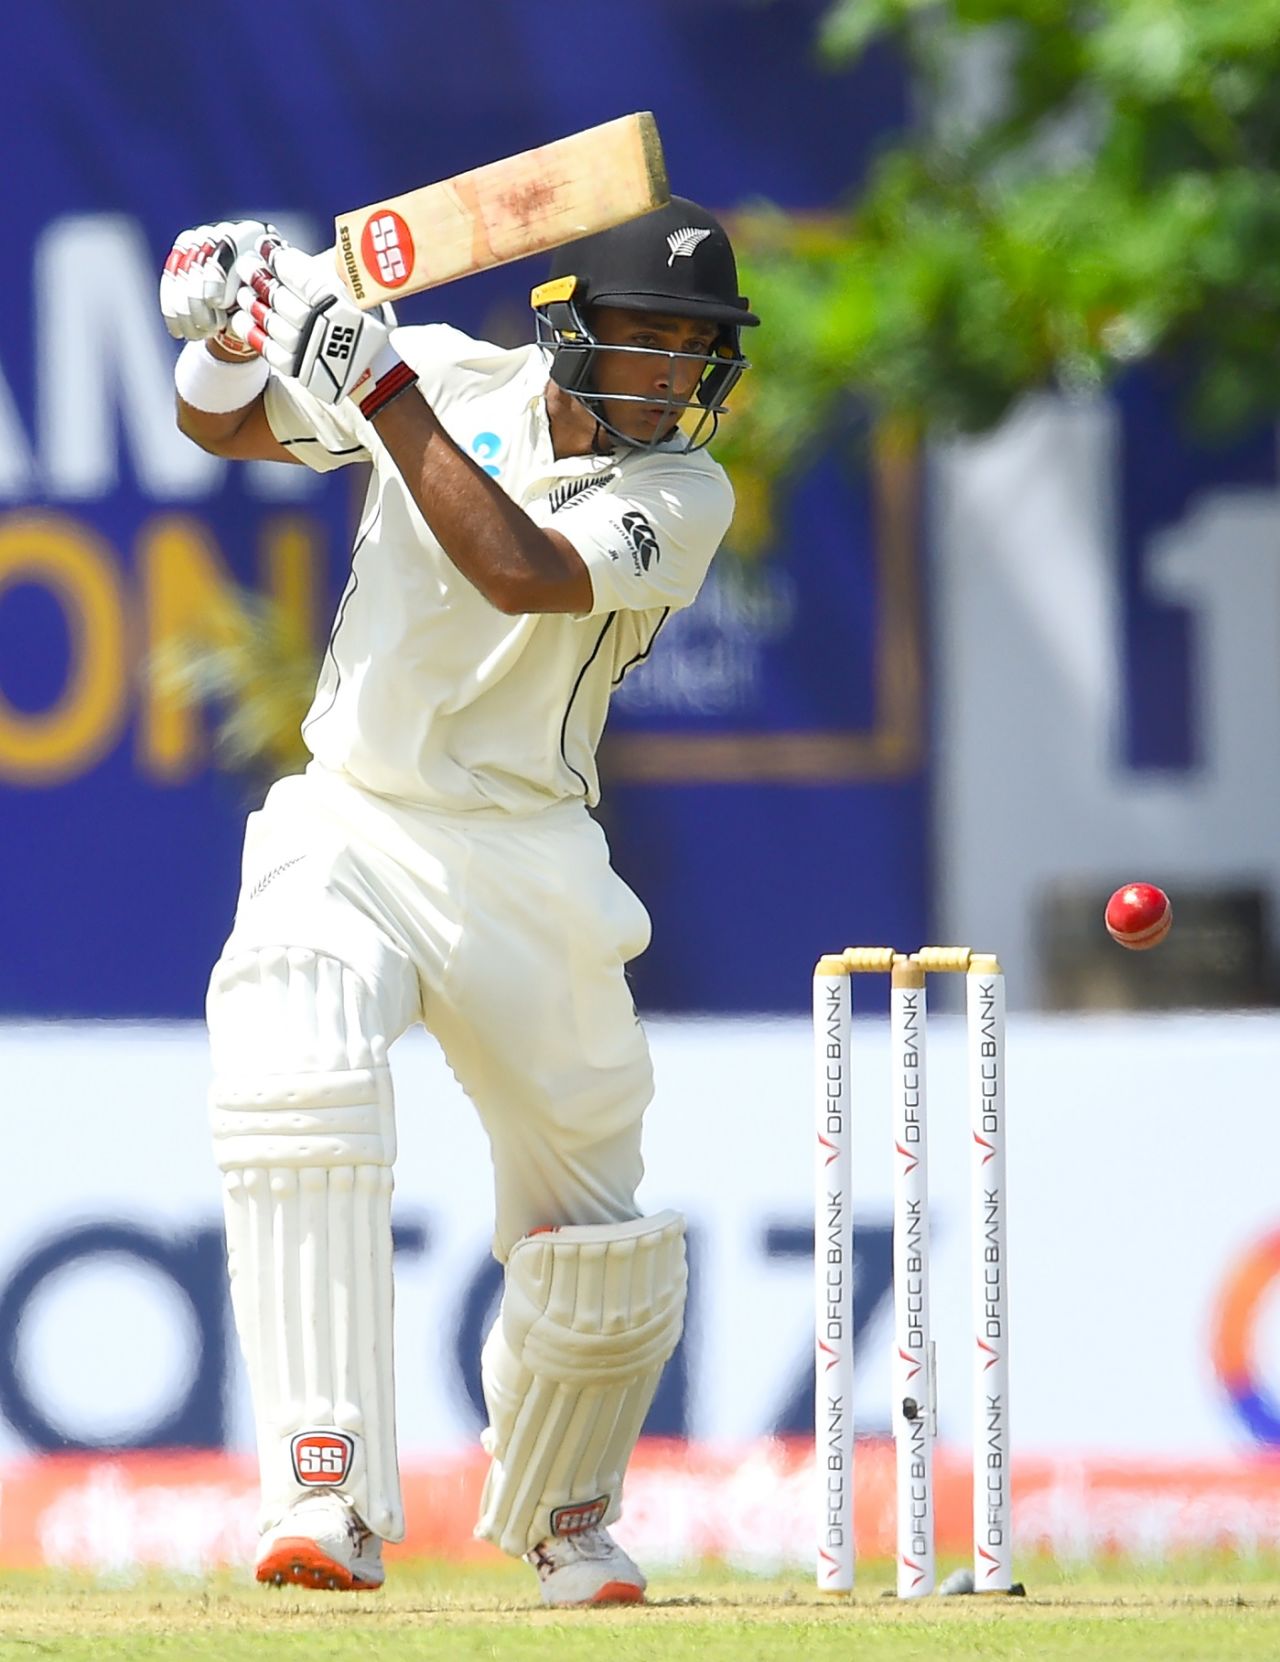 Jeet Raval steers one through the off side, Sri Lanka v New Zealand, 1st Test, Galle, 1st day, August 14, 2019